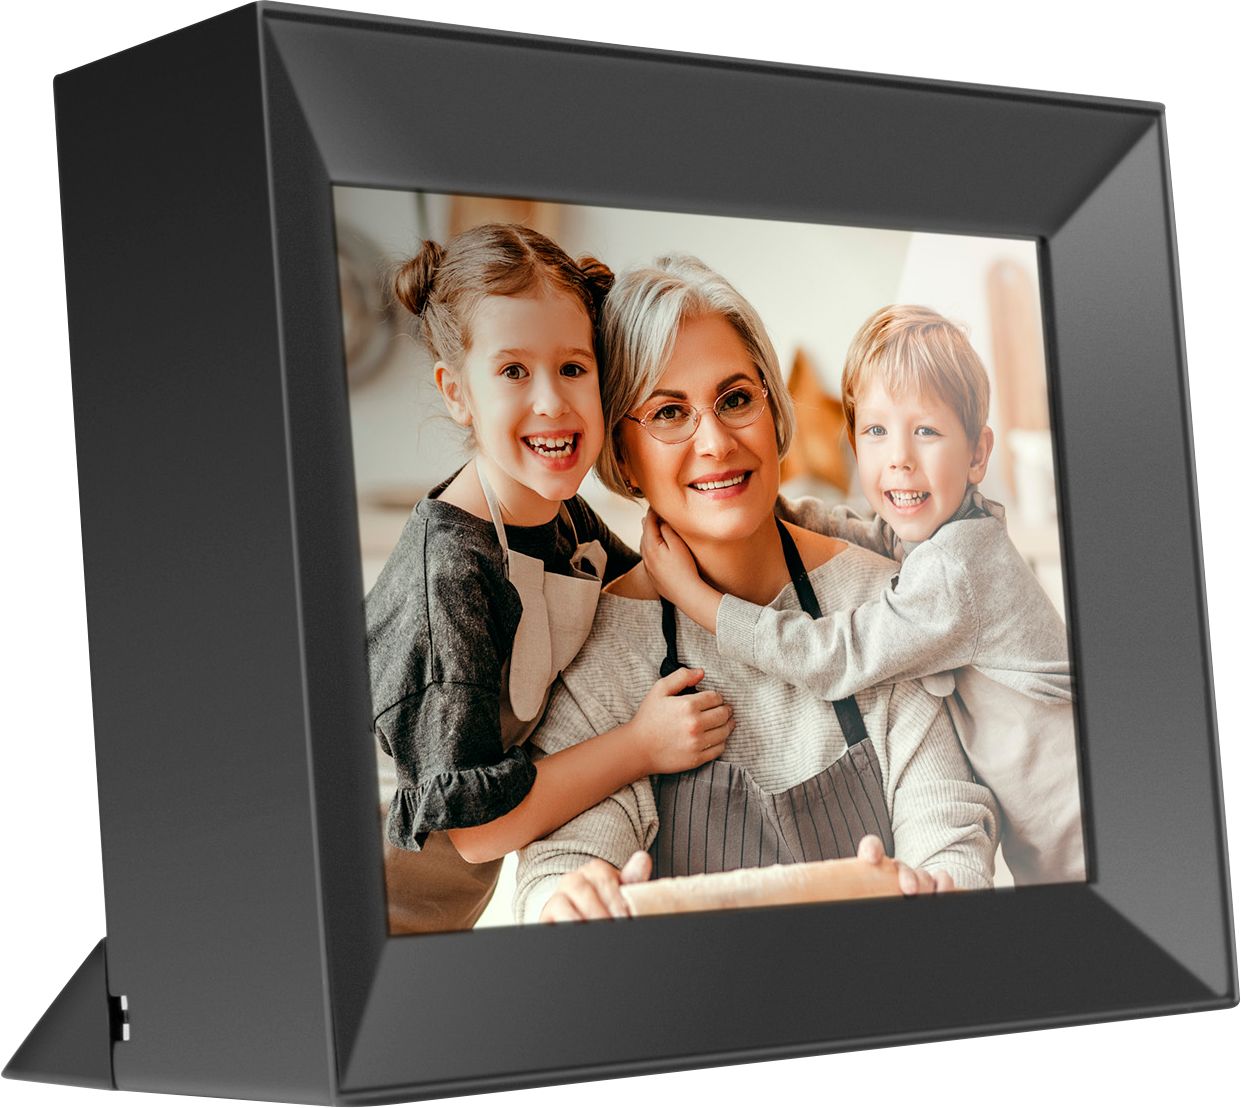 ramp Verhuizer Regelen Aluratek 8" WiFi Touchscreen Digital Photo Frame with Auto Rotation and  16GB Built-in Memory Black AWS08F - Best Buy